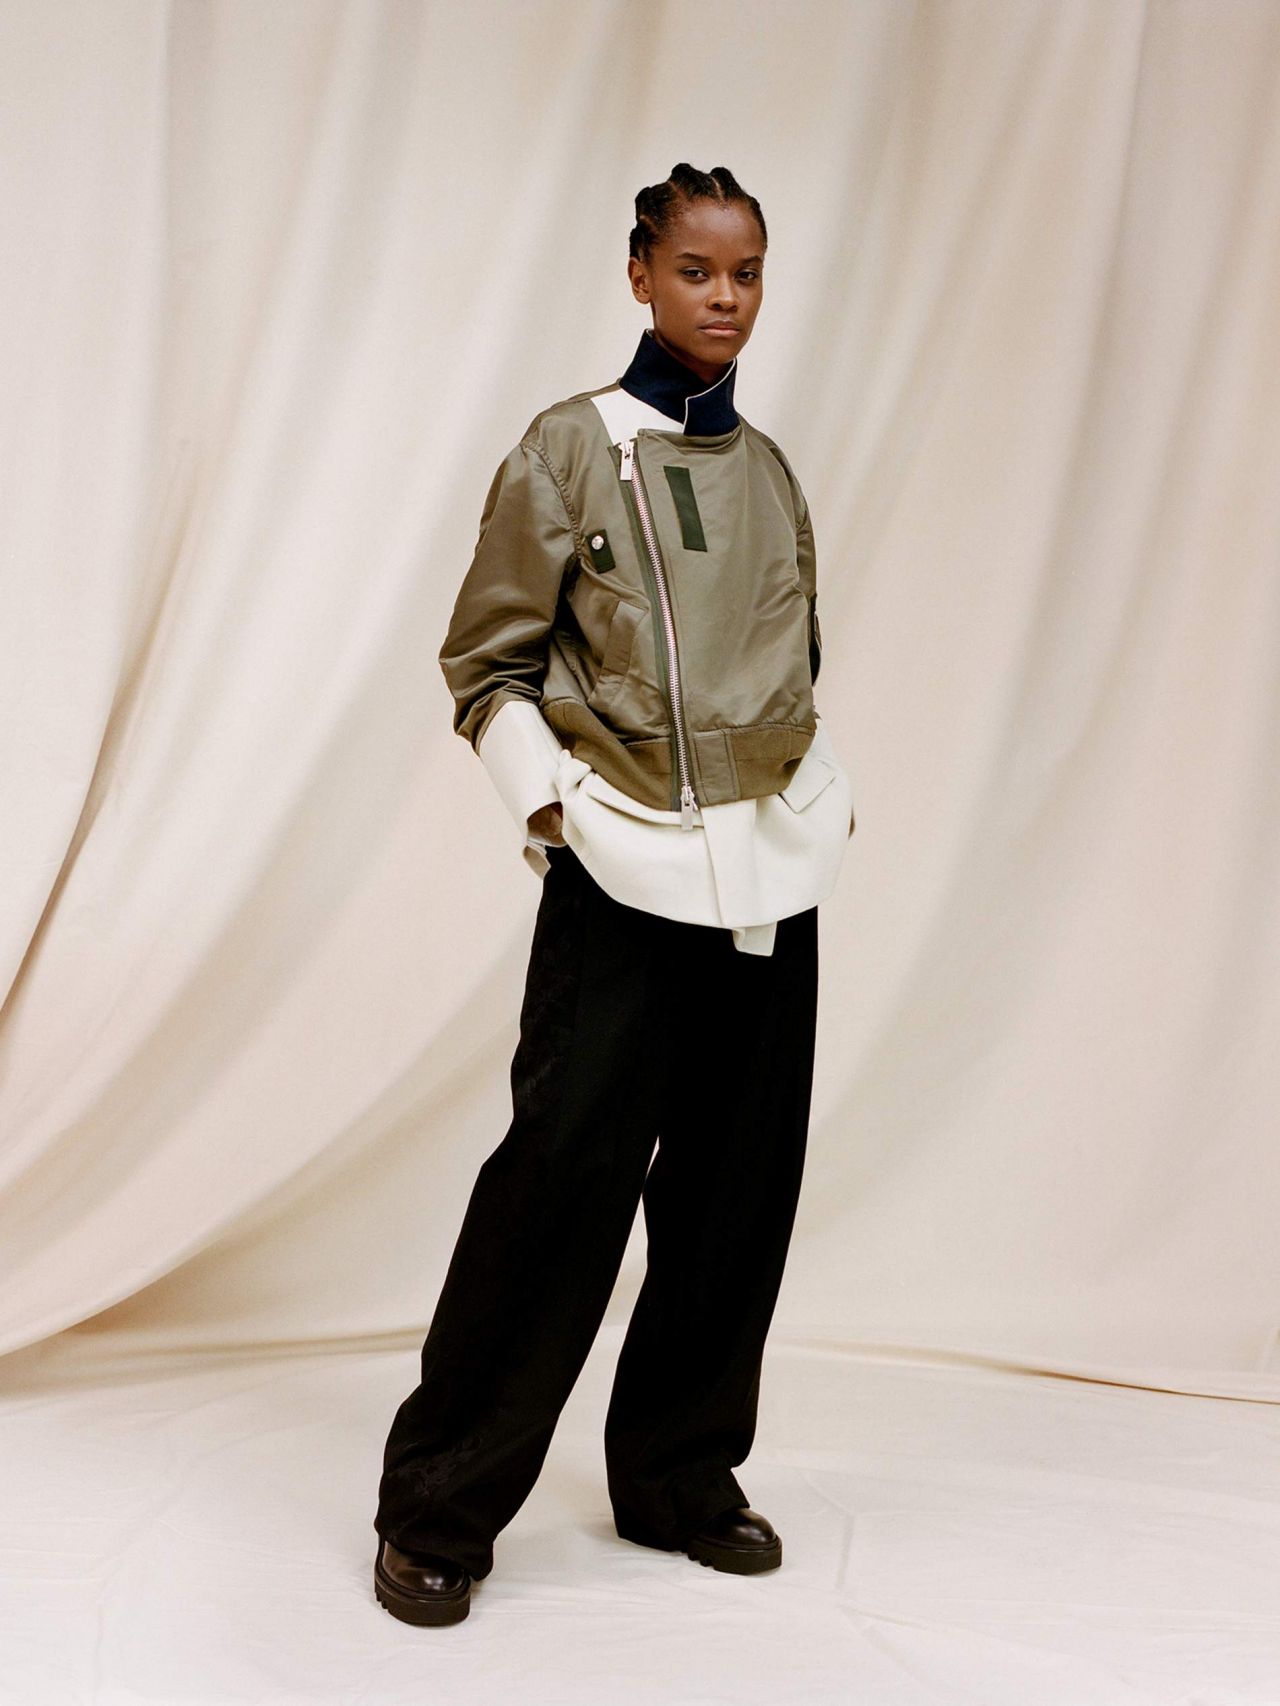 letitia-wright-the-edit-by-net-a-porter-october-2020-3.jpg